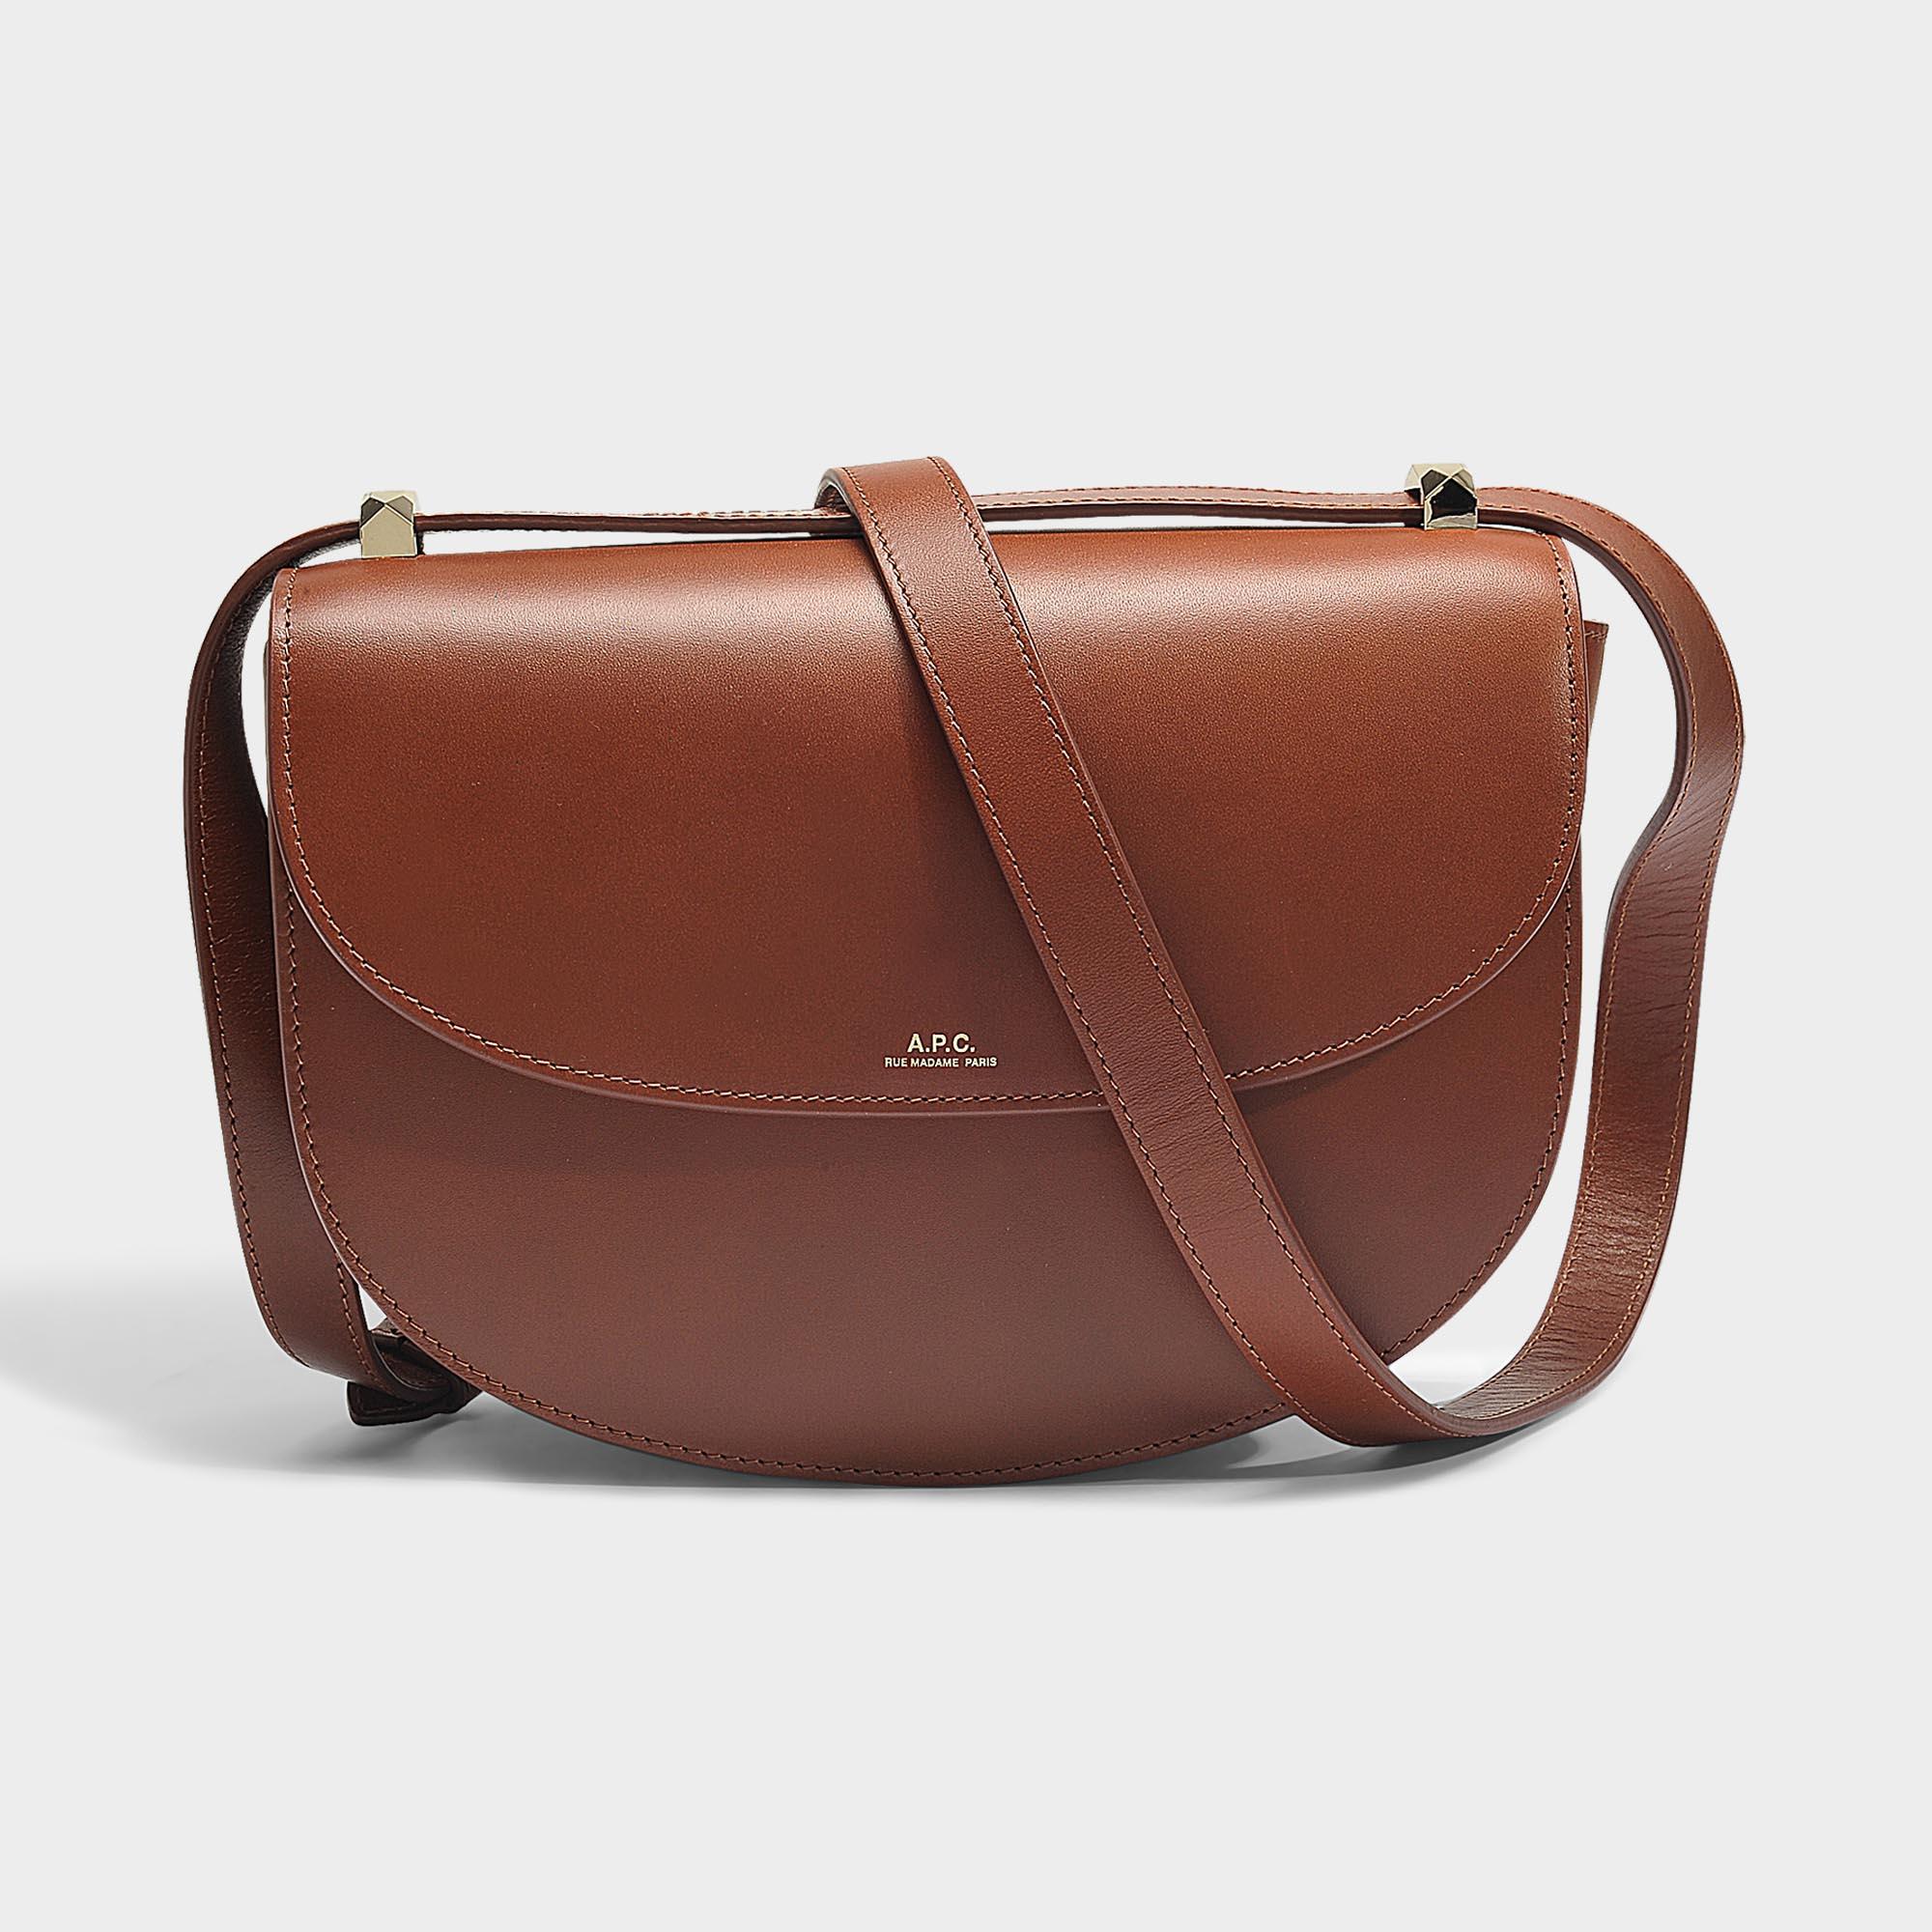 A.P.C. Geneve Bag in Brown - Save 4% | Lyst